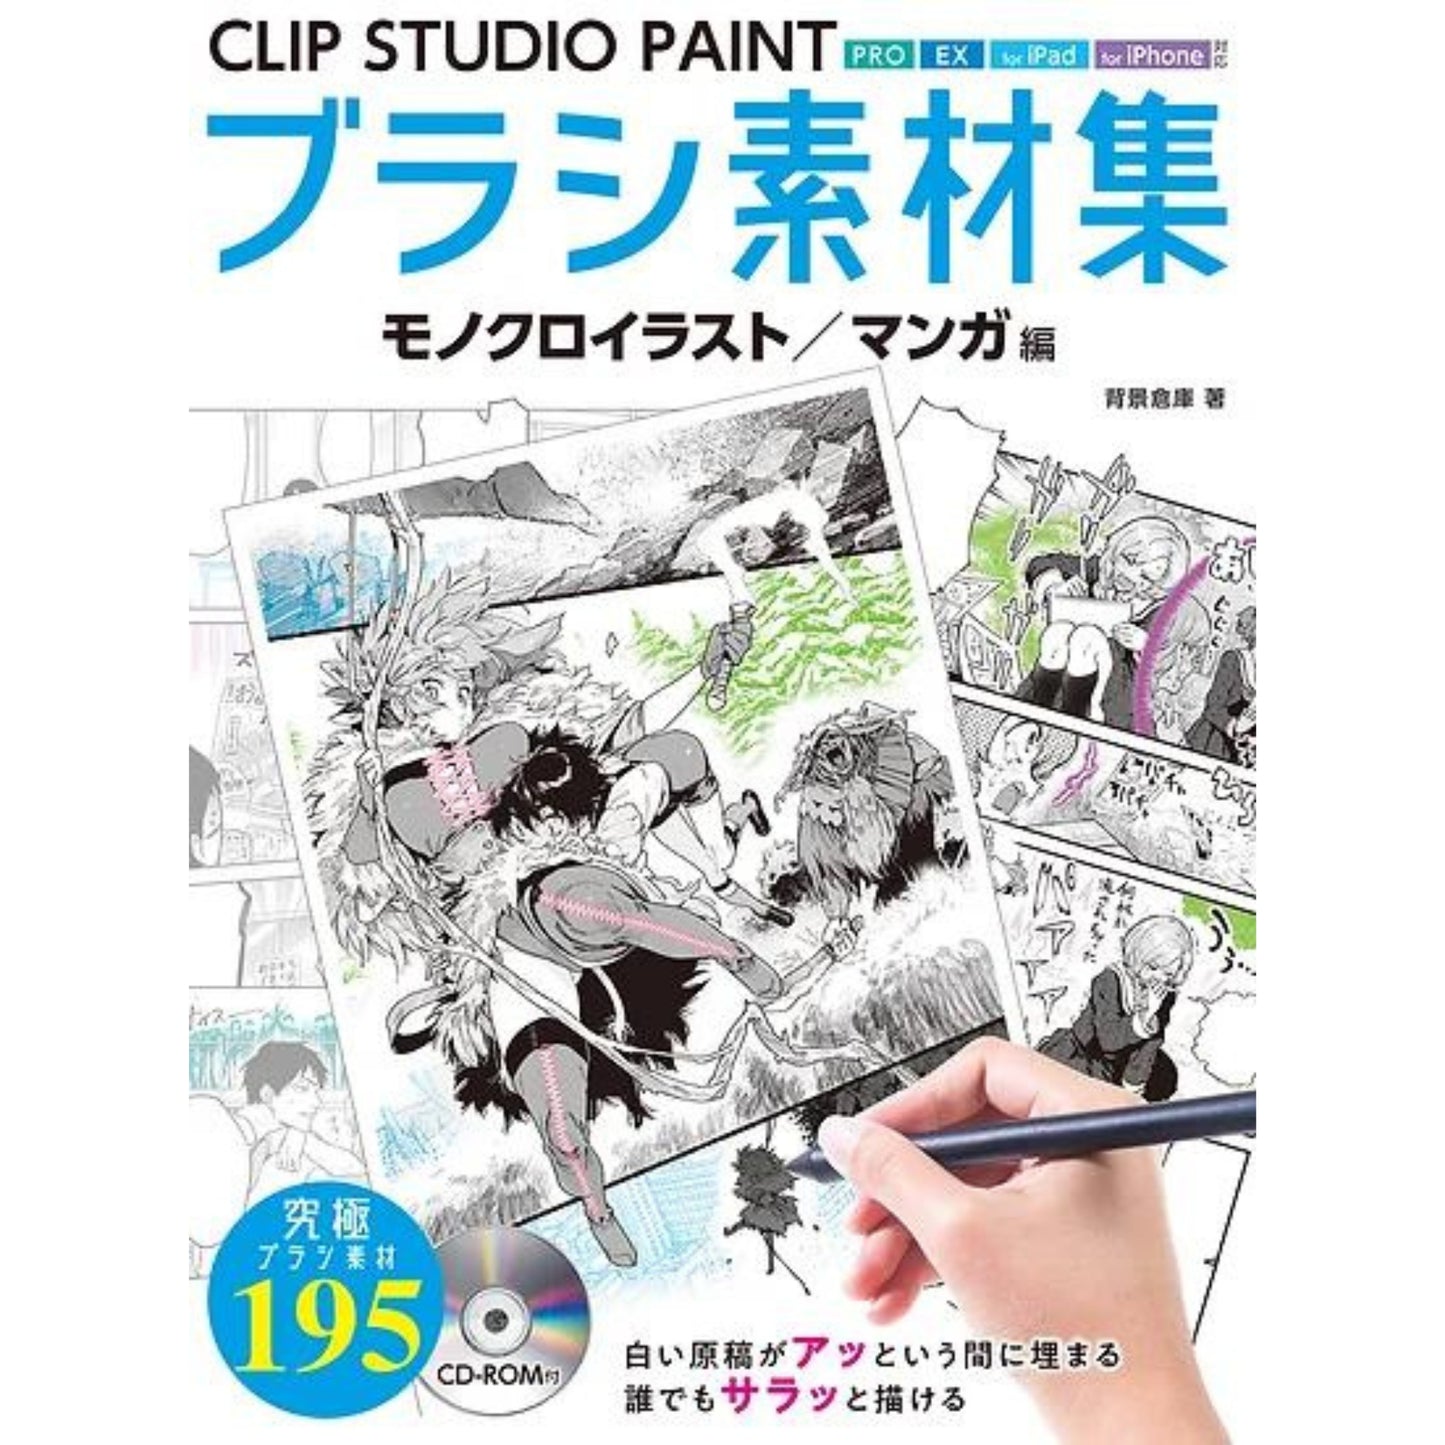 How to draw - jap. Zeichenbuch - Clip Studio Paint Brush Collection+ CD-ROM mit 195 Brushes